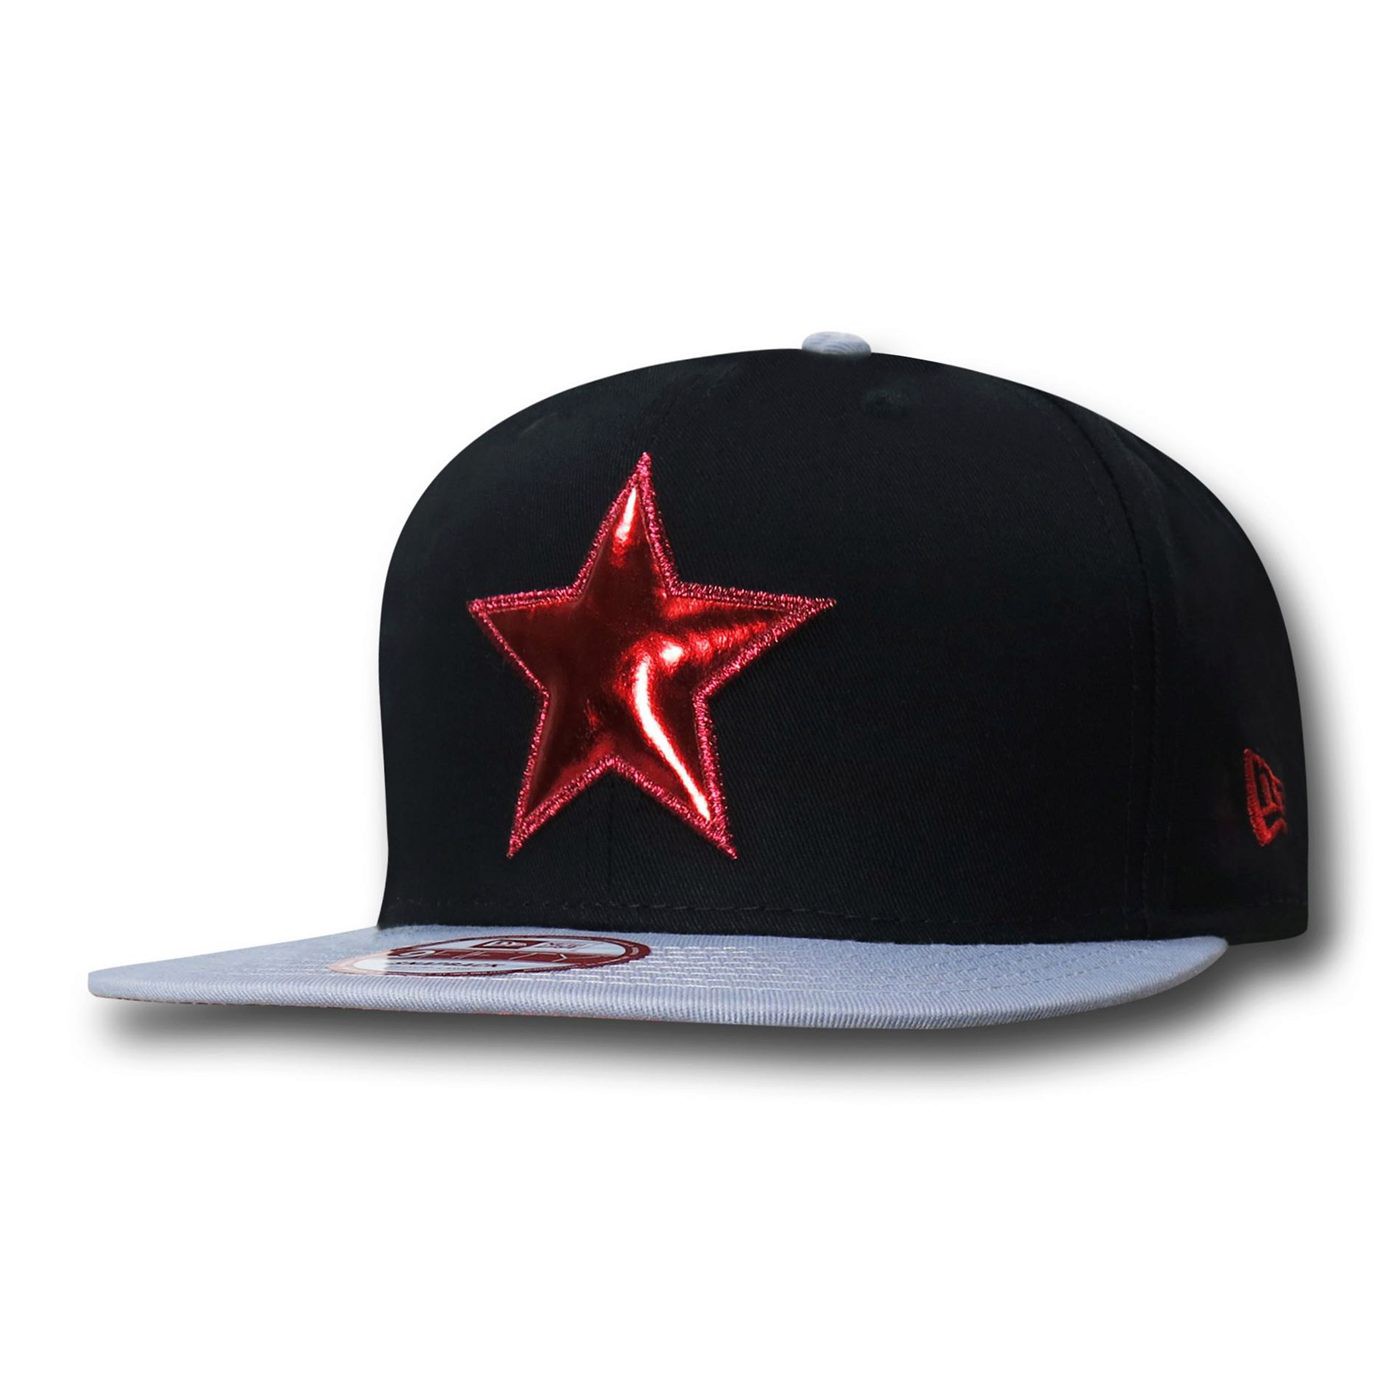 all red dallas cowboys hat